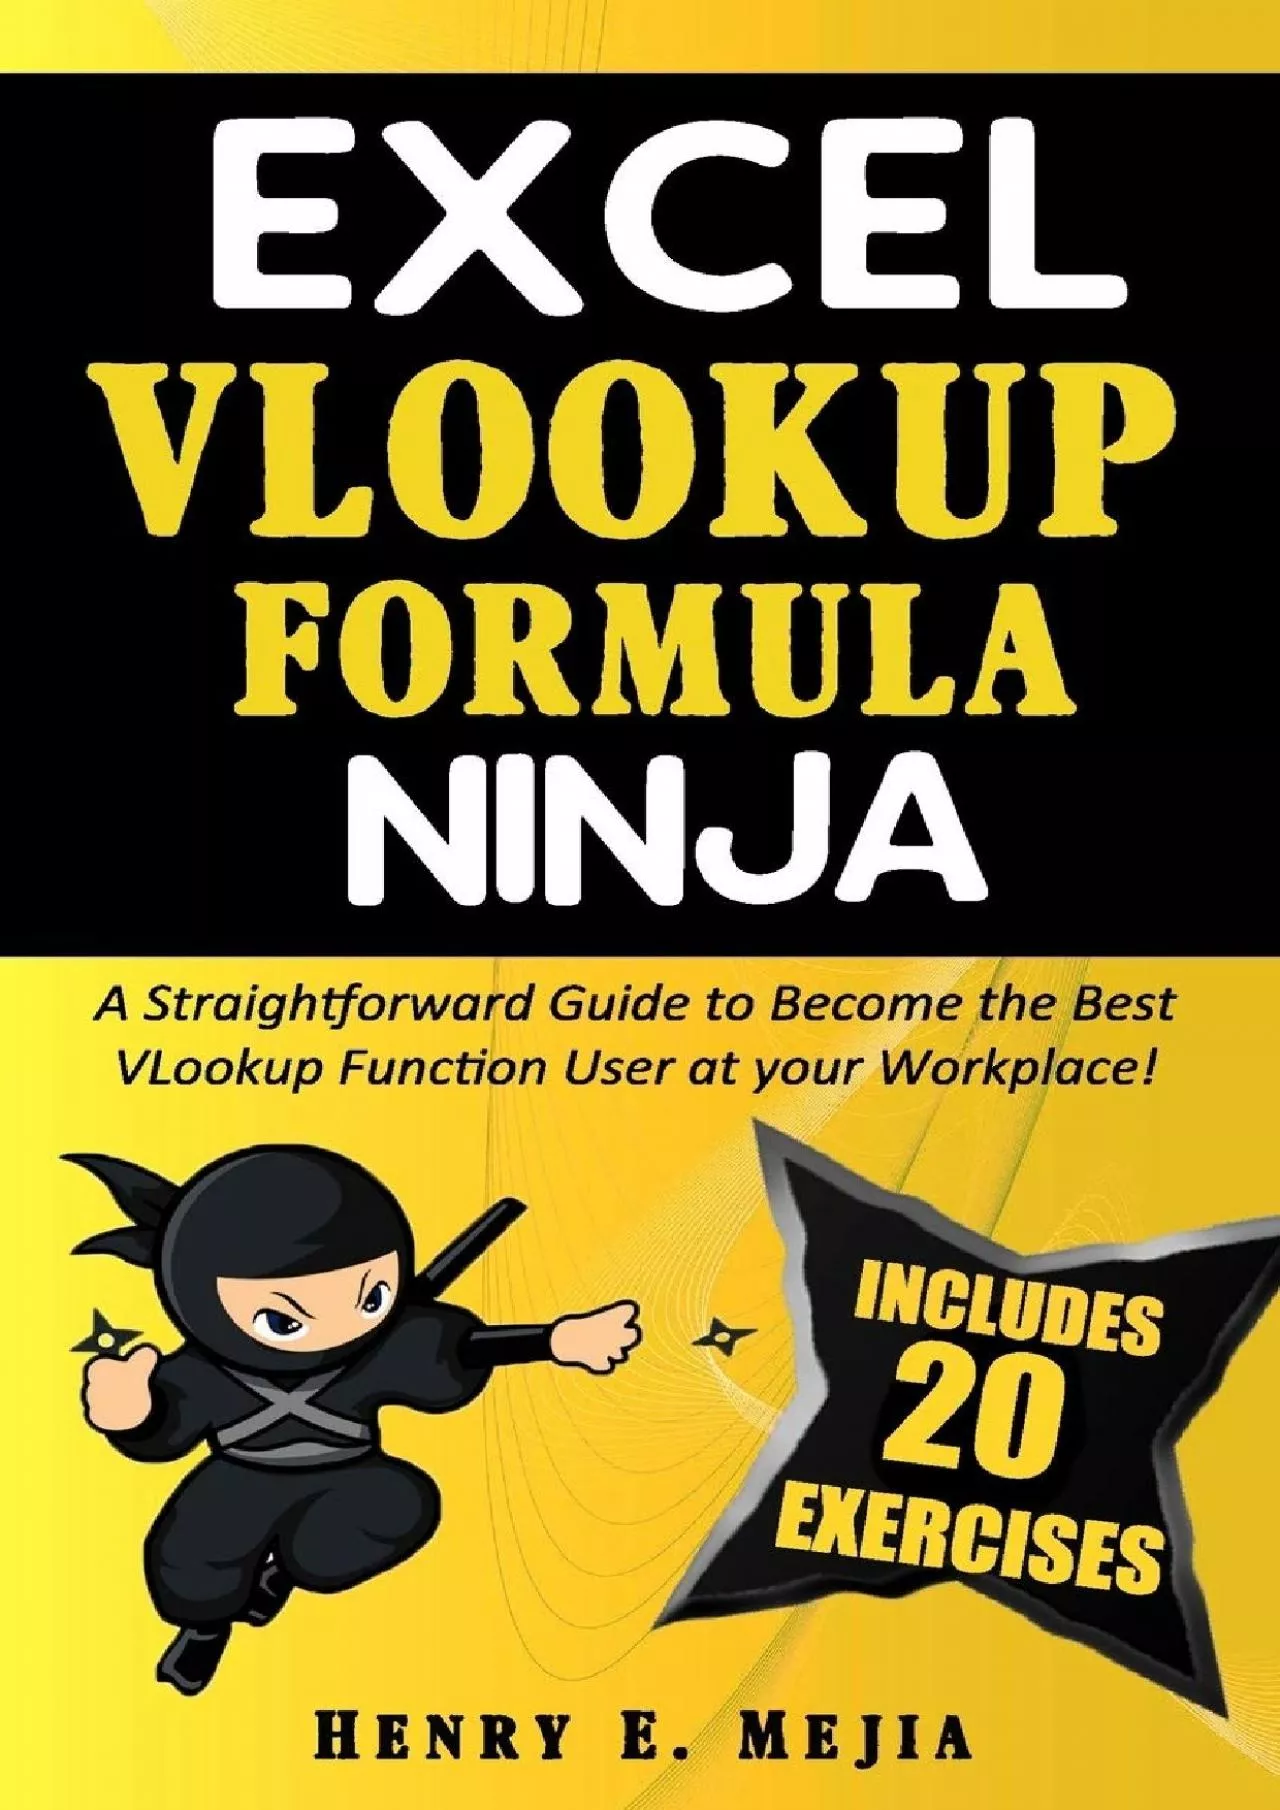 EXCEL VLOOKUP FORMULA NINJA: A Straightforward Guide to Become the Best VLookup Function